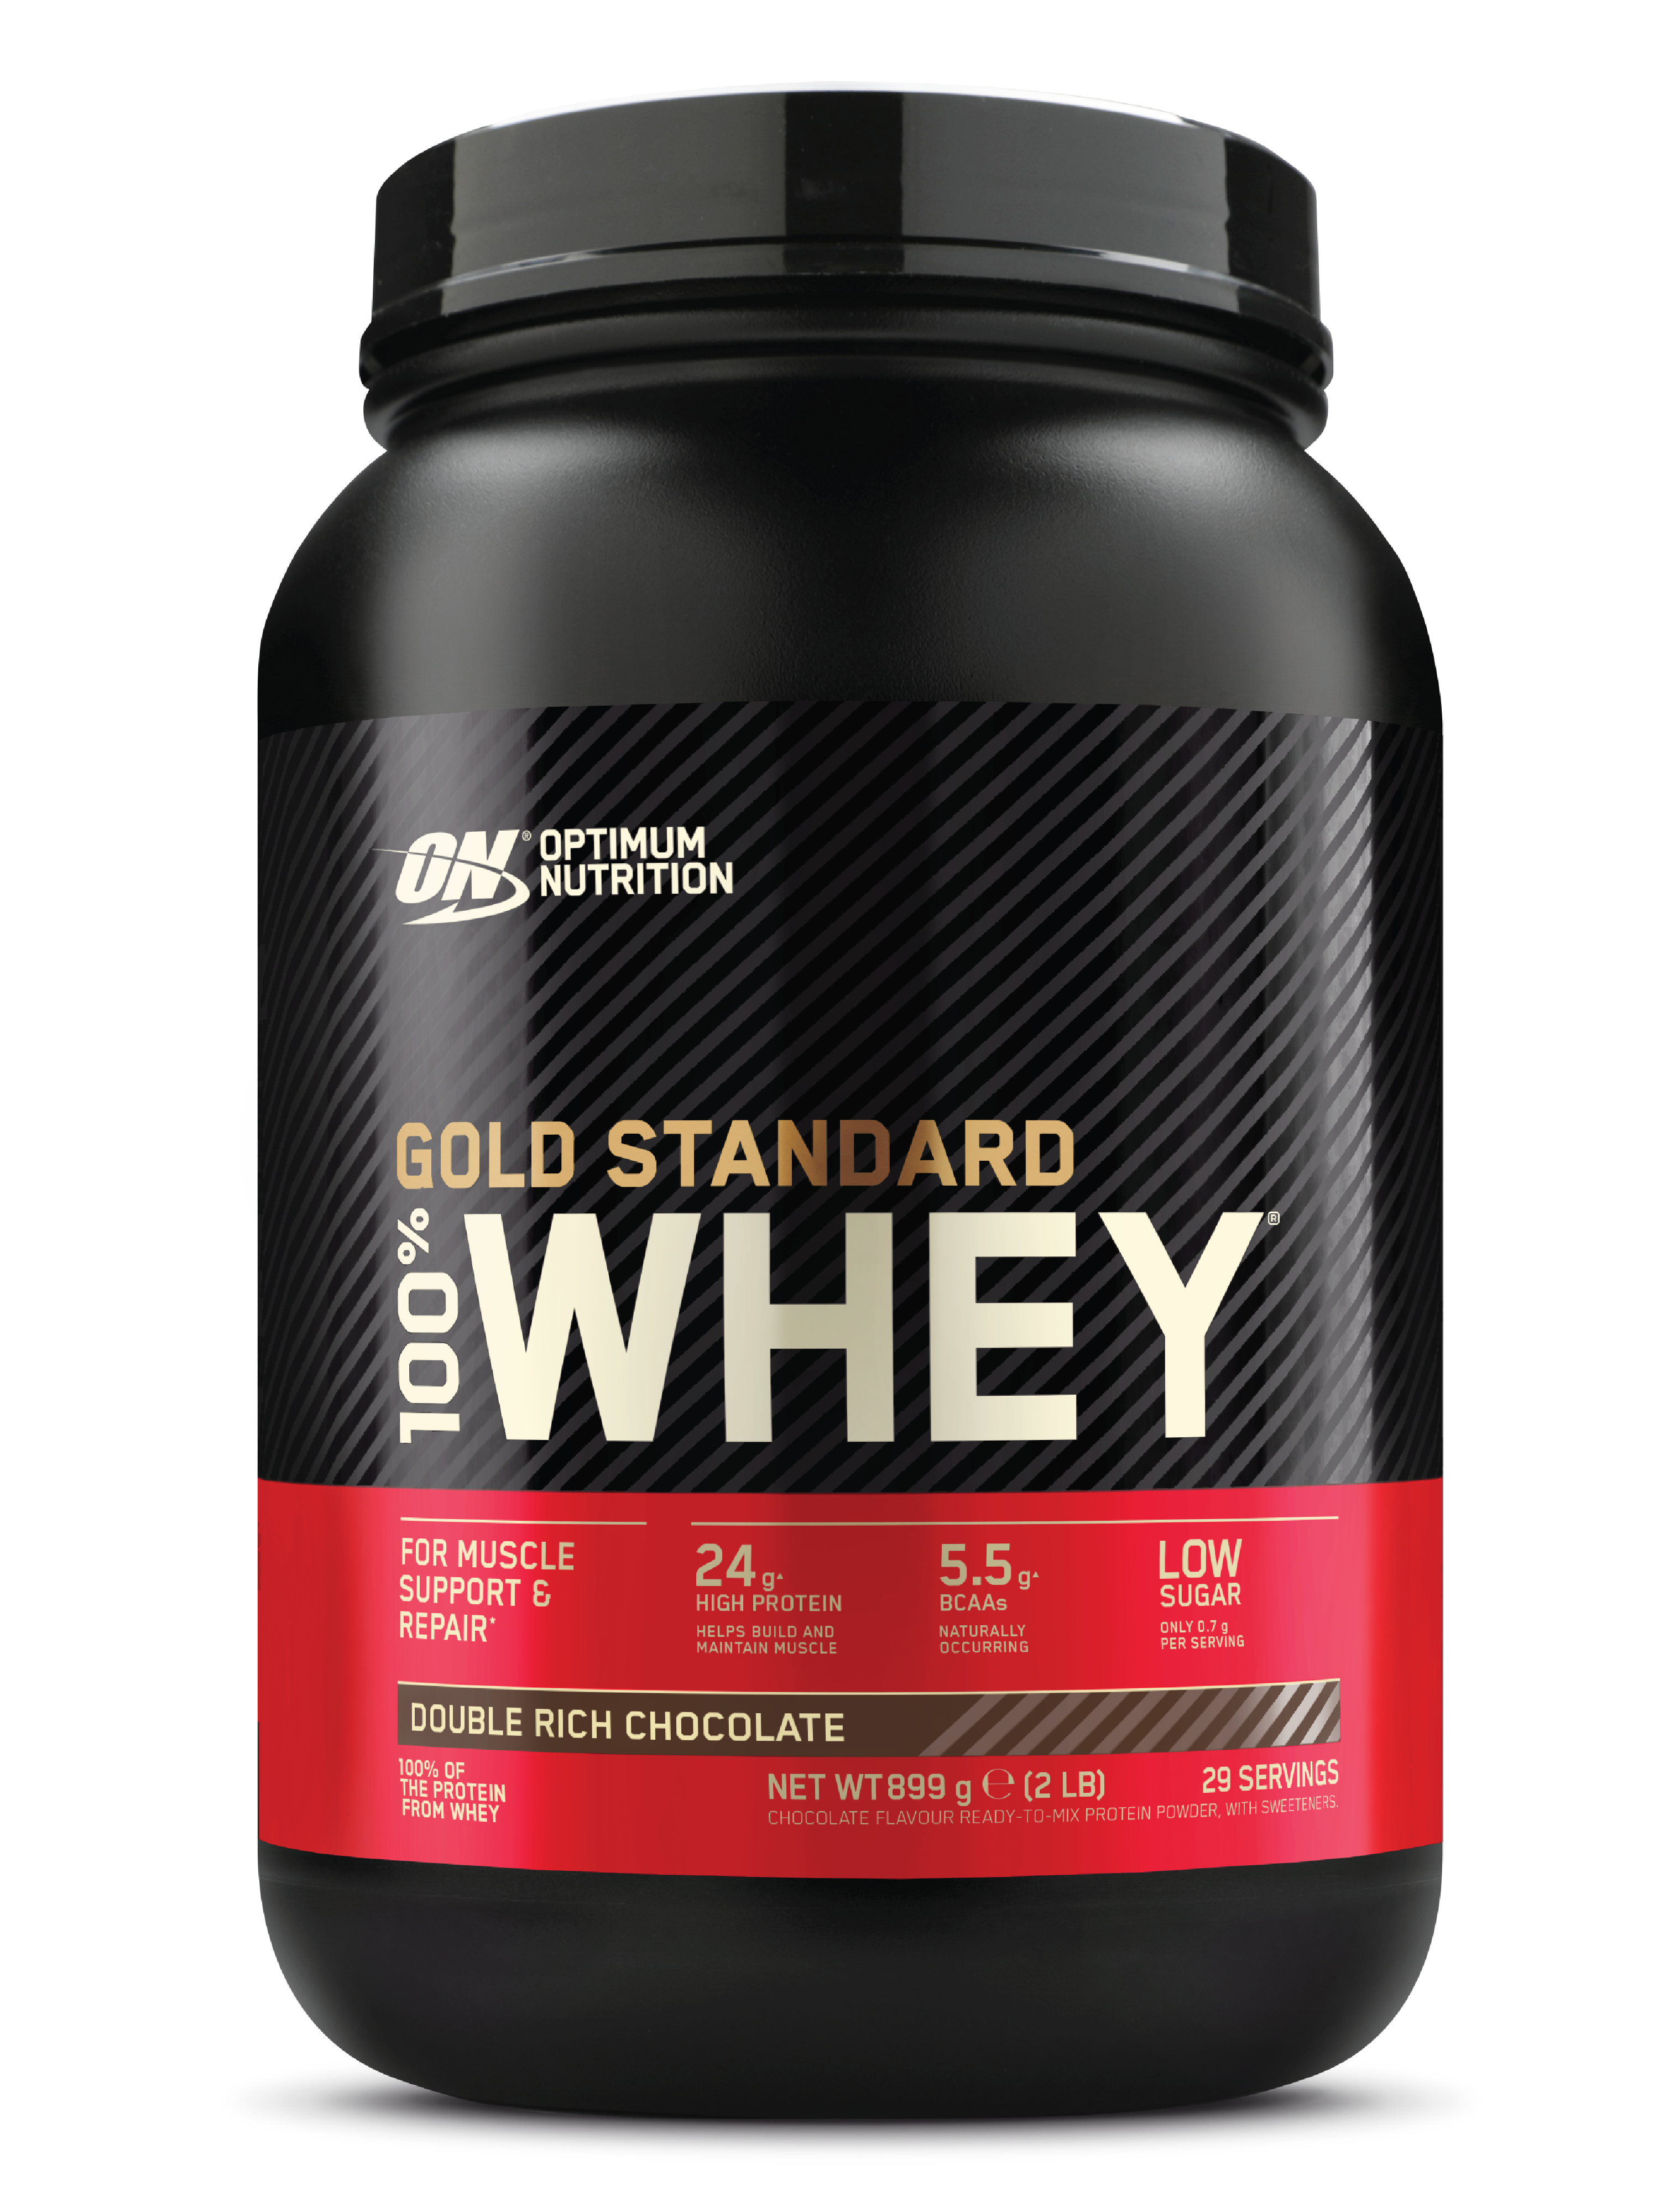 Optimum Nutrition 100% Whey GOLD Standard Whey, Double Rich Chocolate, 899 g